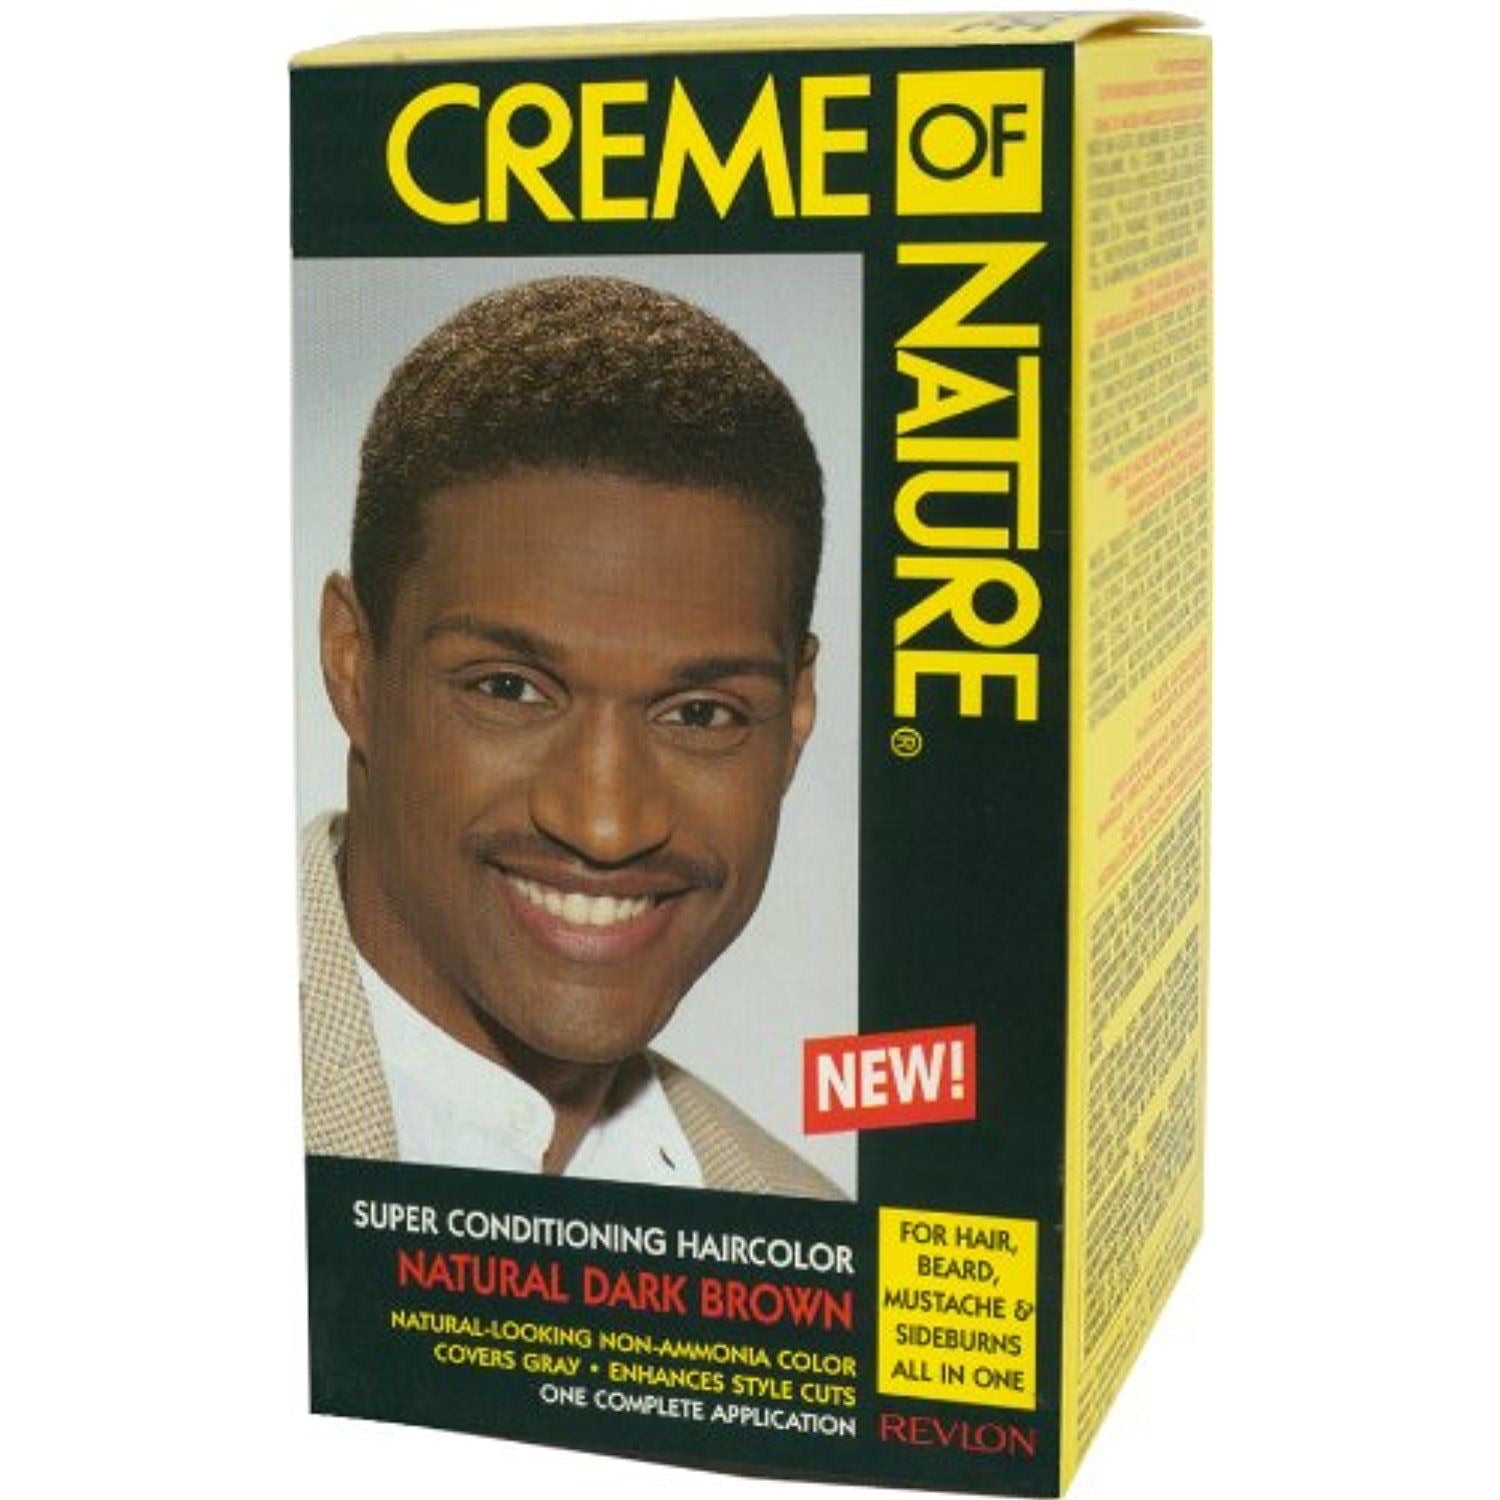 Creme of nature super conditioning hair color